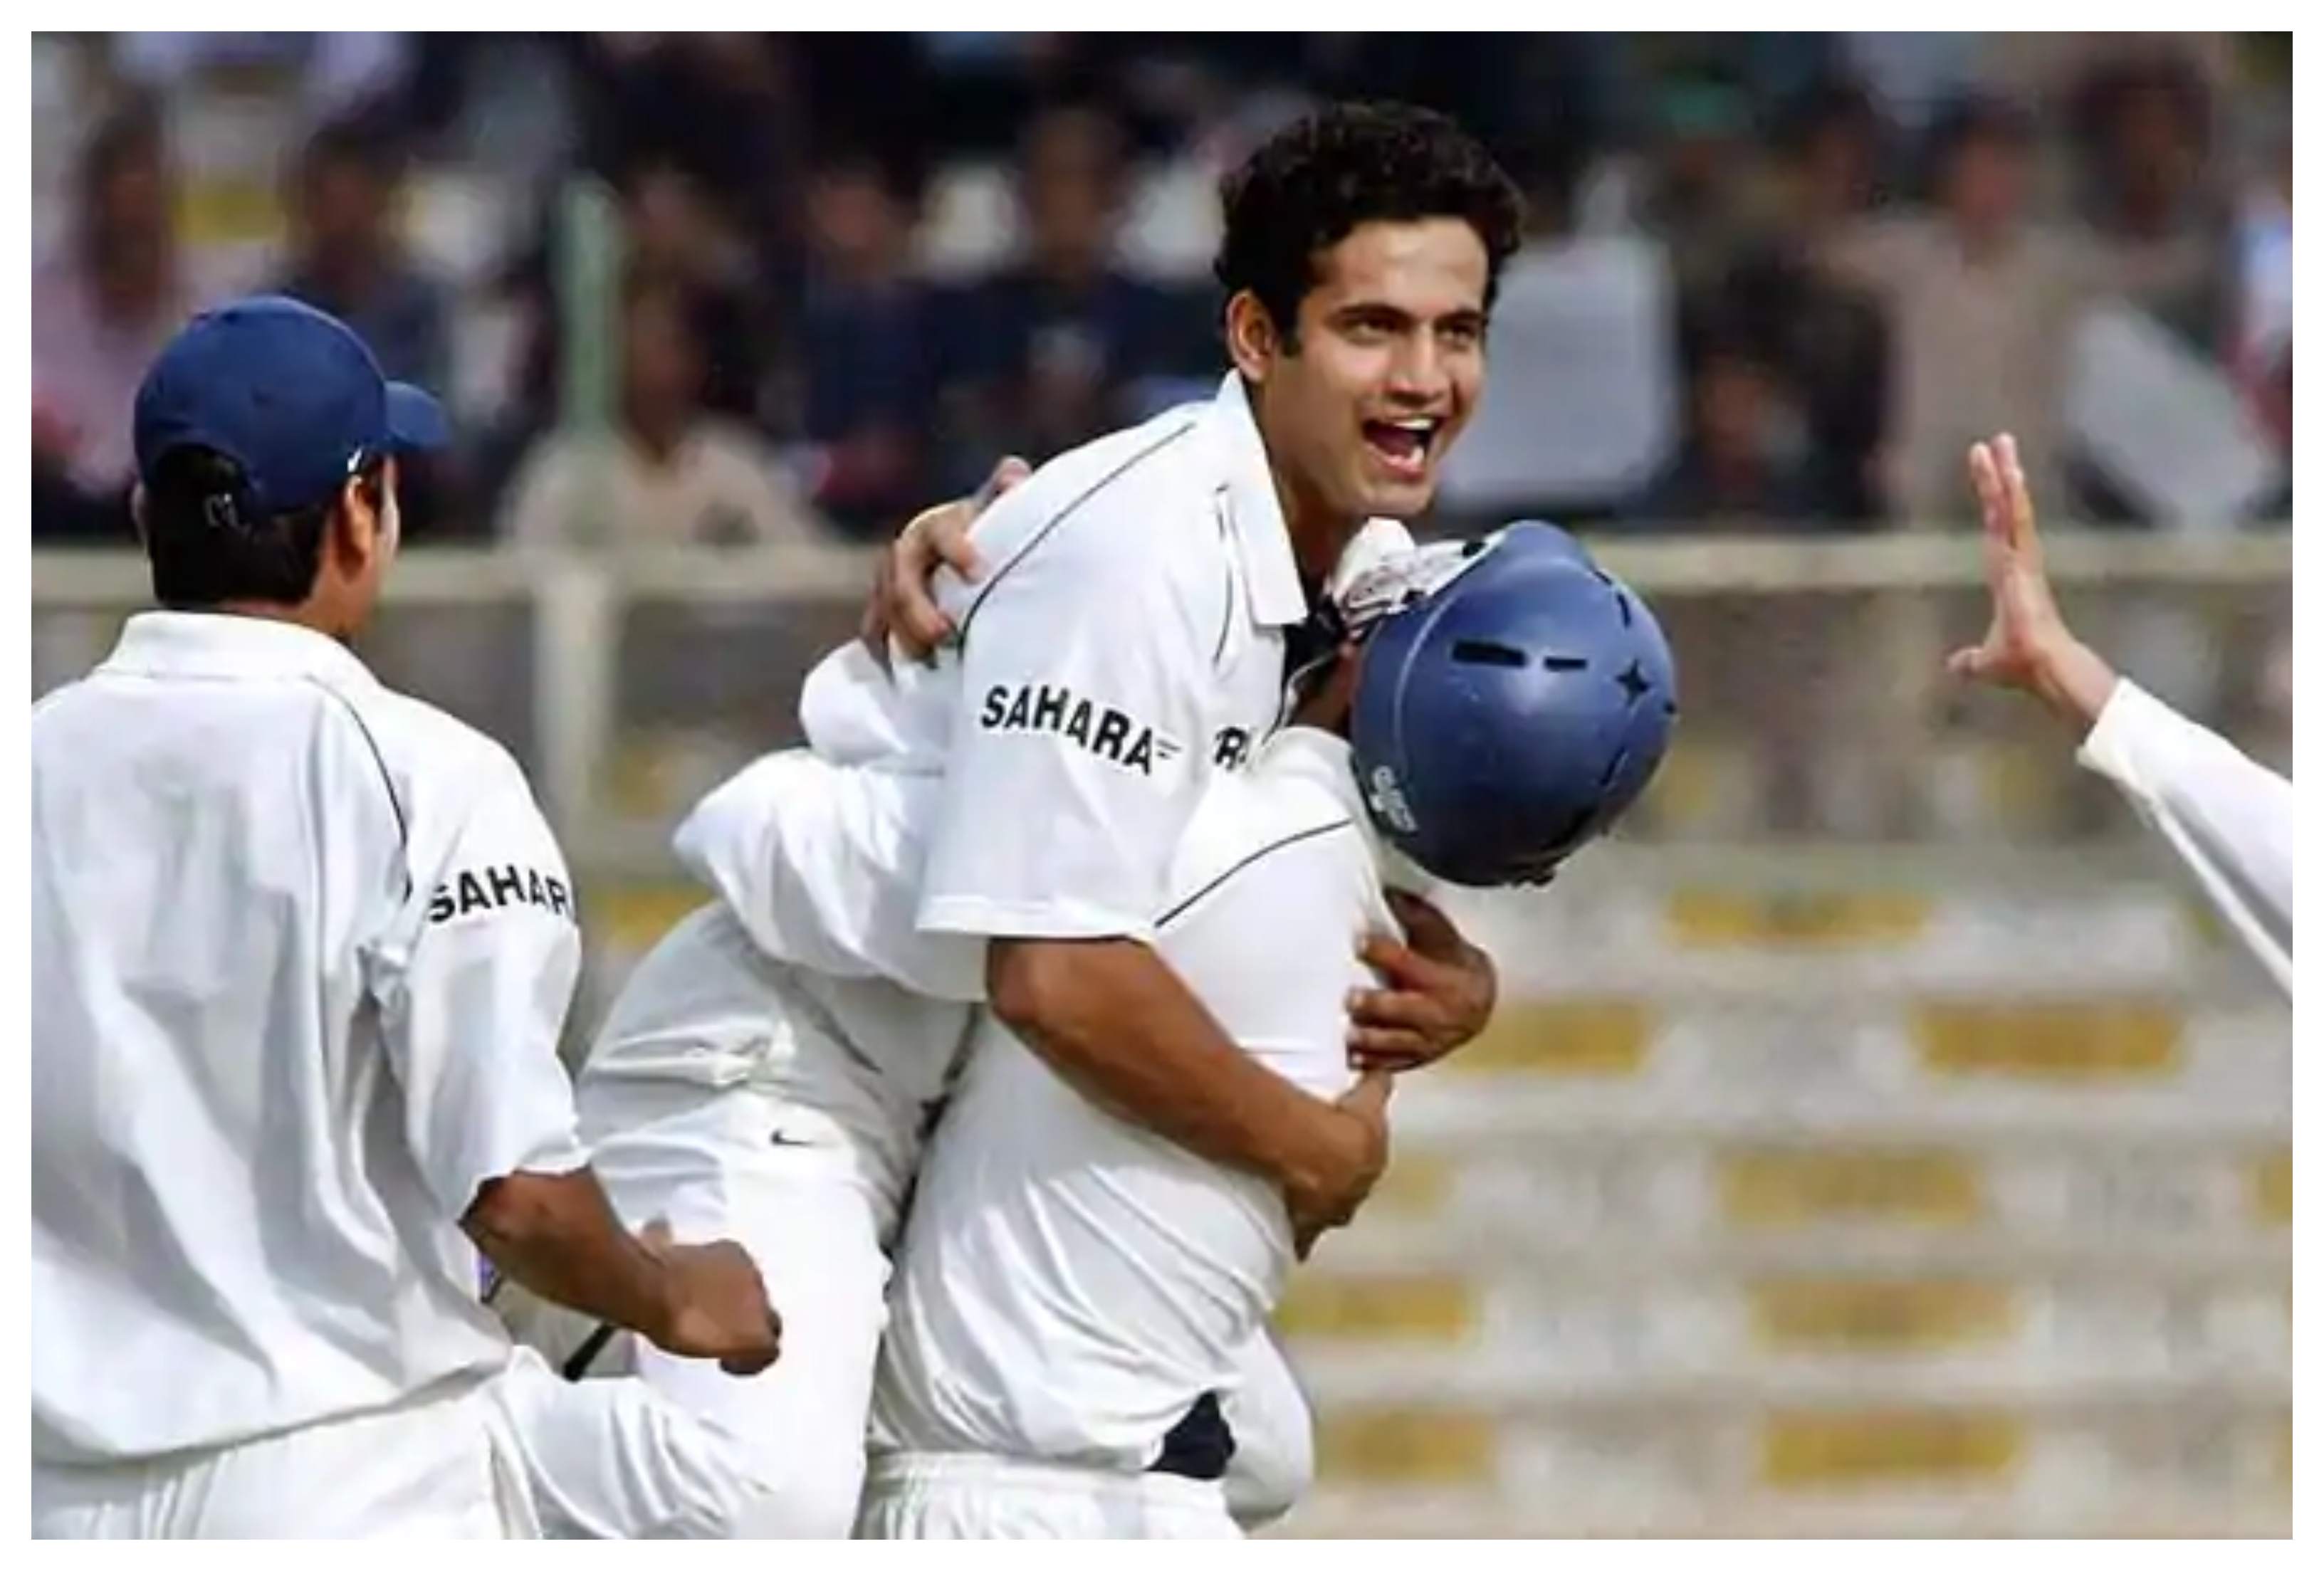 Irfan Pathan celebrates after picking up the hat-trick against Pakistan (Source: ICC/Twitter)